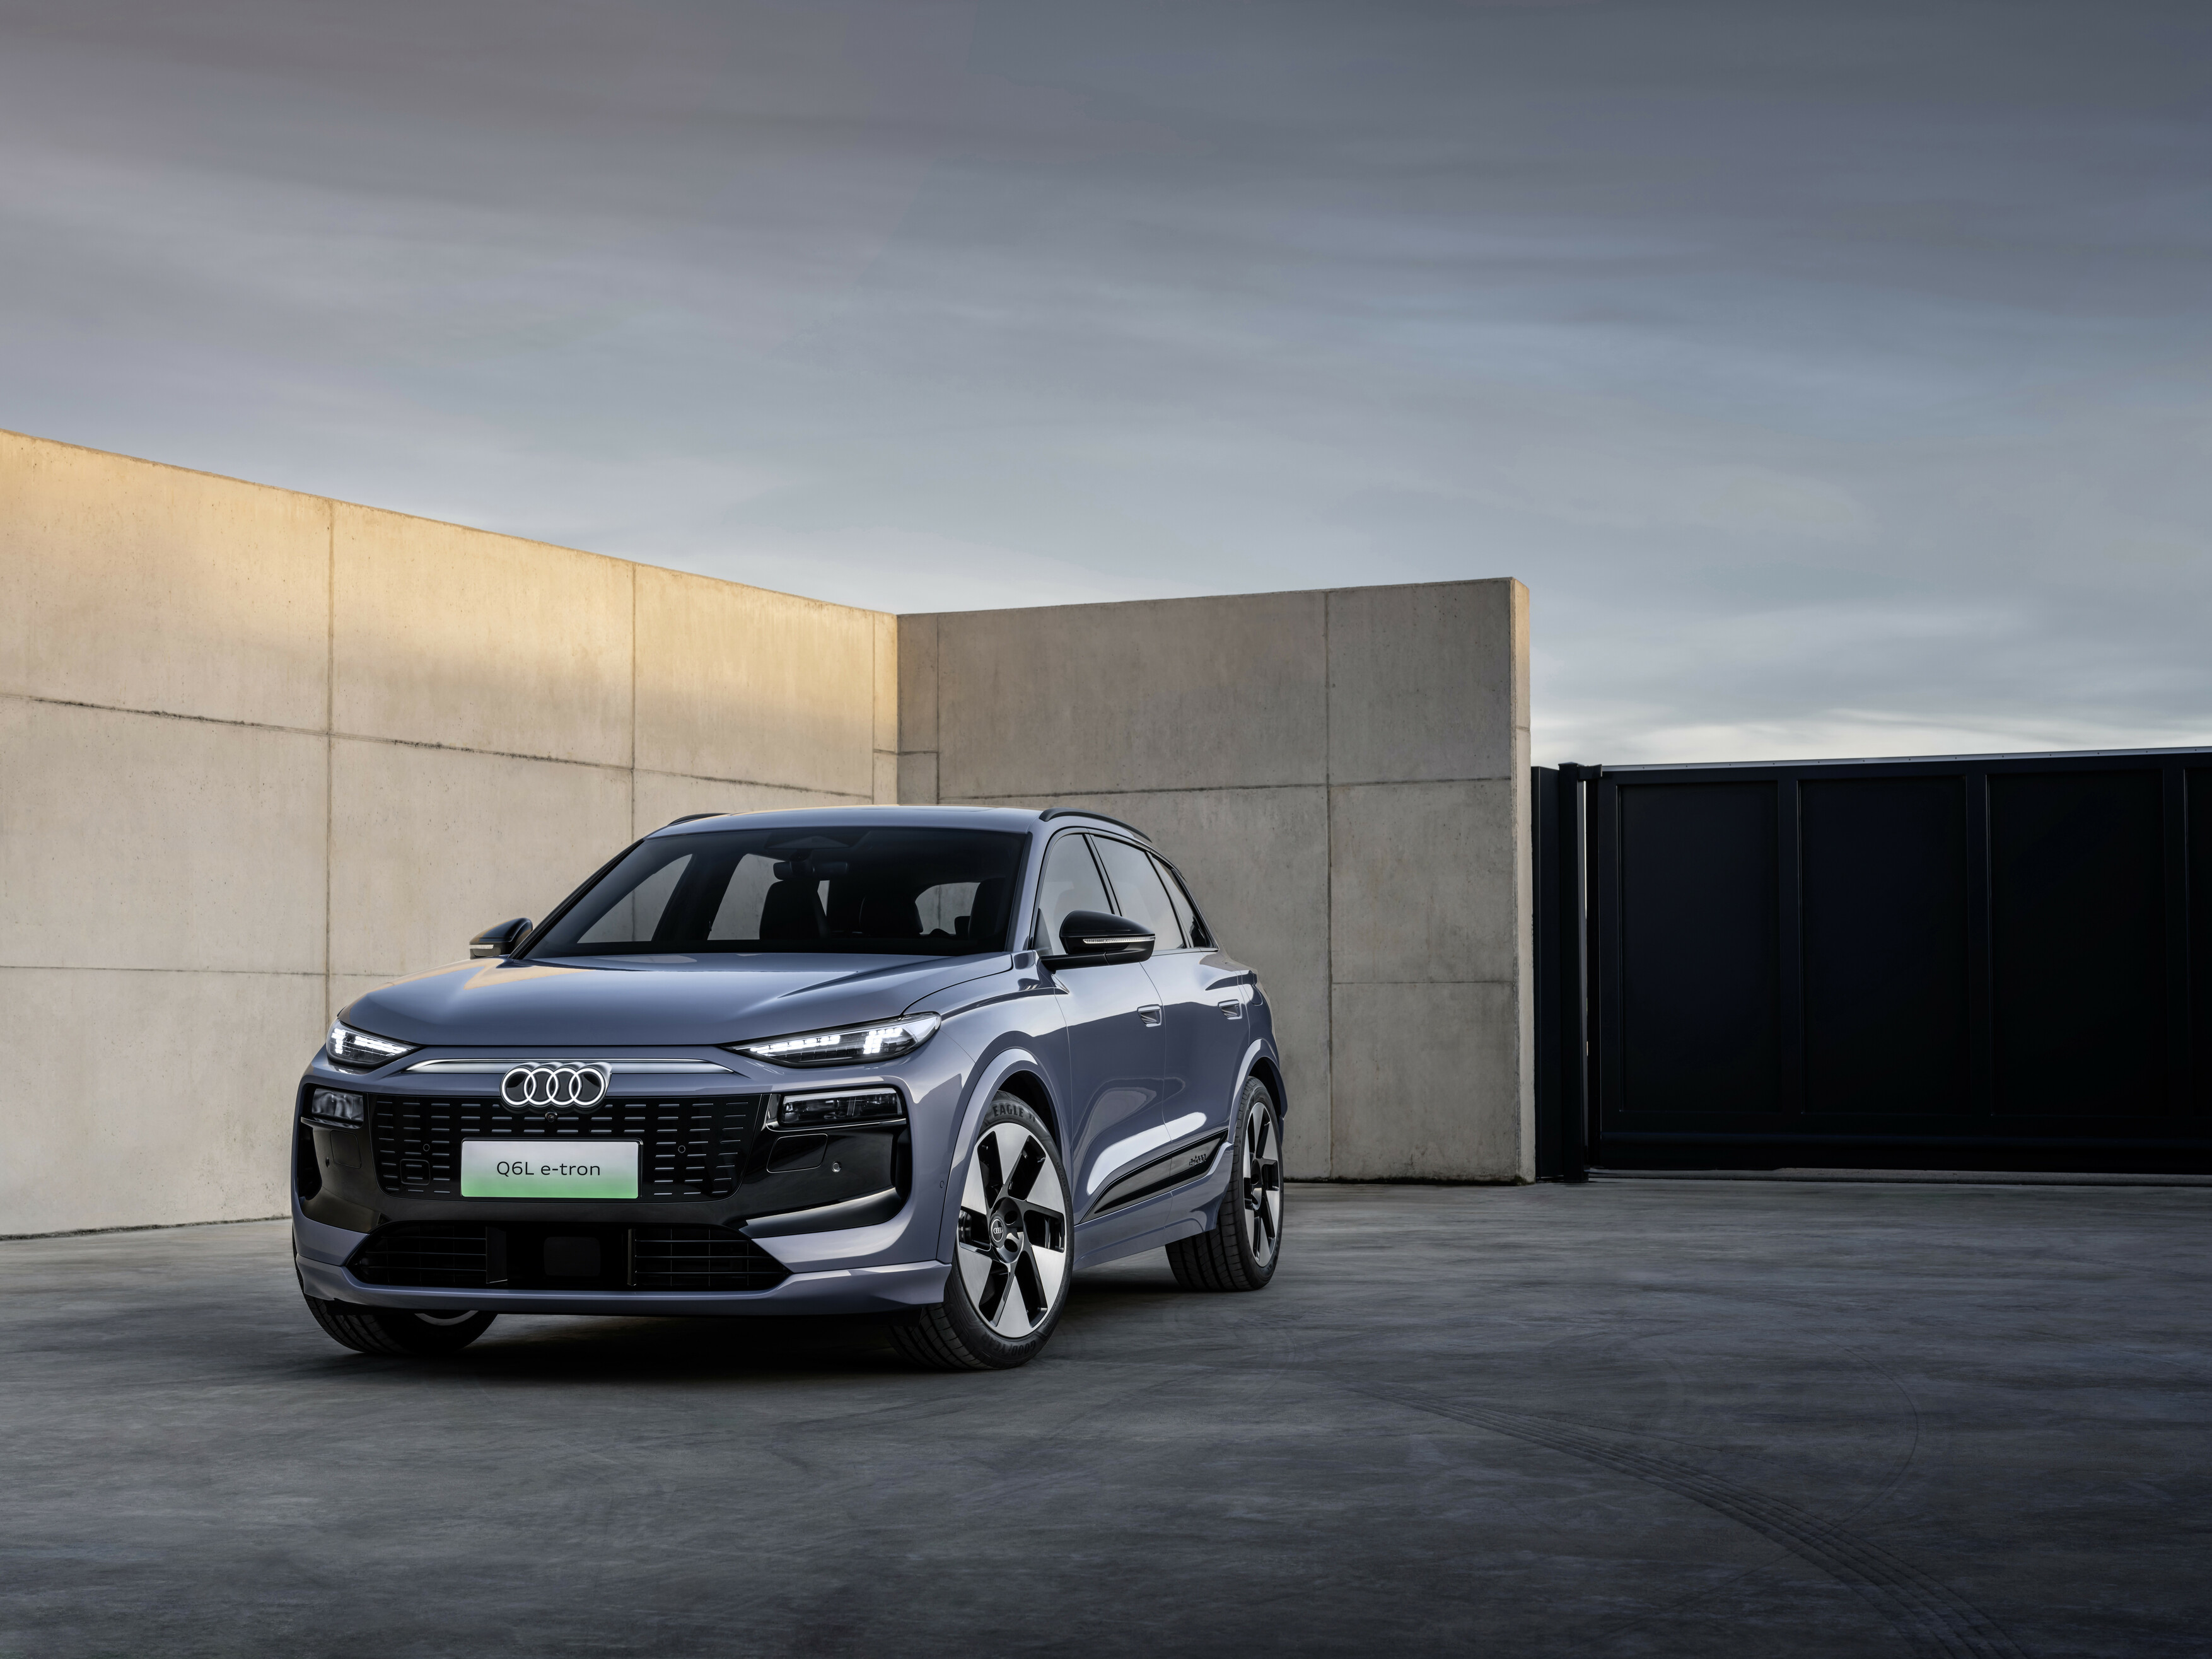 The Audi Q6L e-tron will enter production in China in the last quarter of 2024 with customer deliveries to begin in 2025